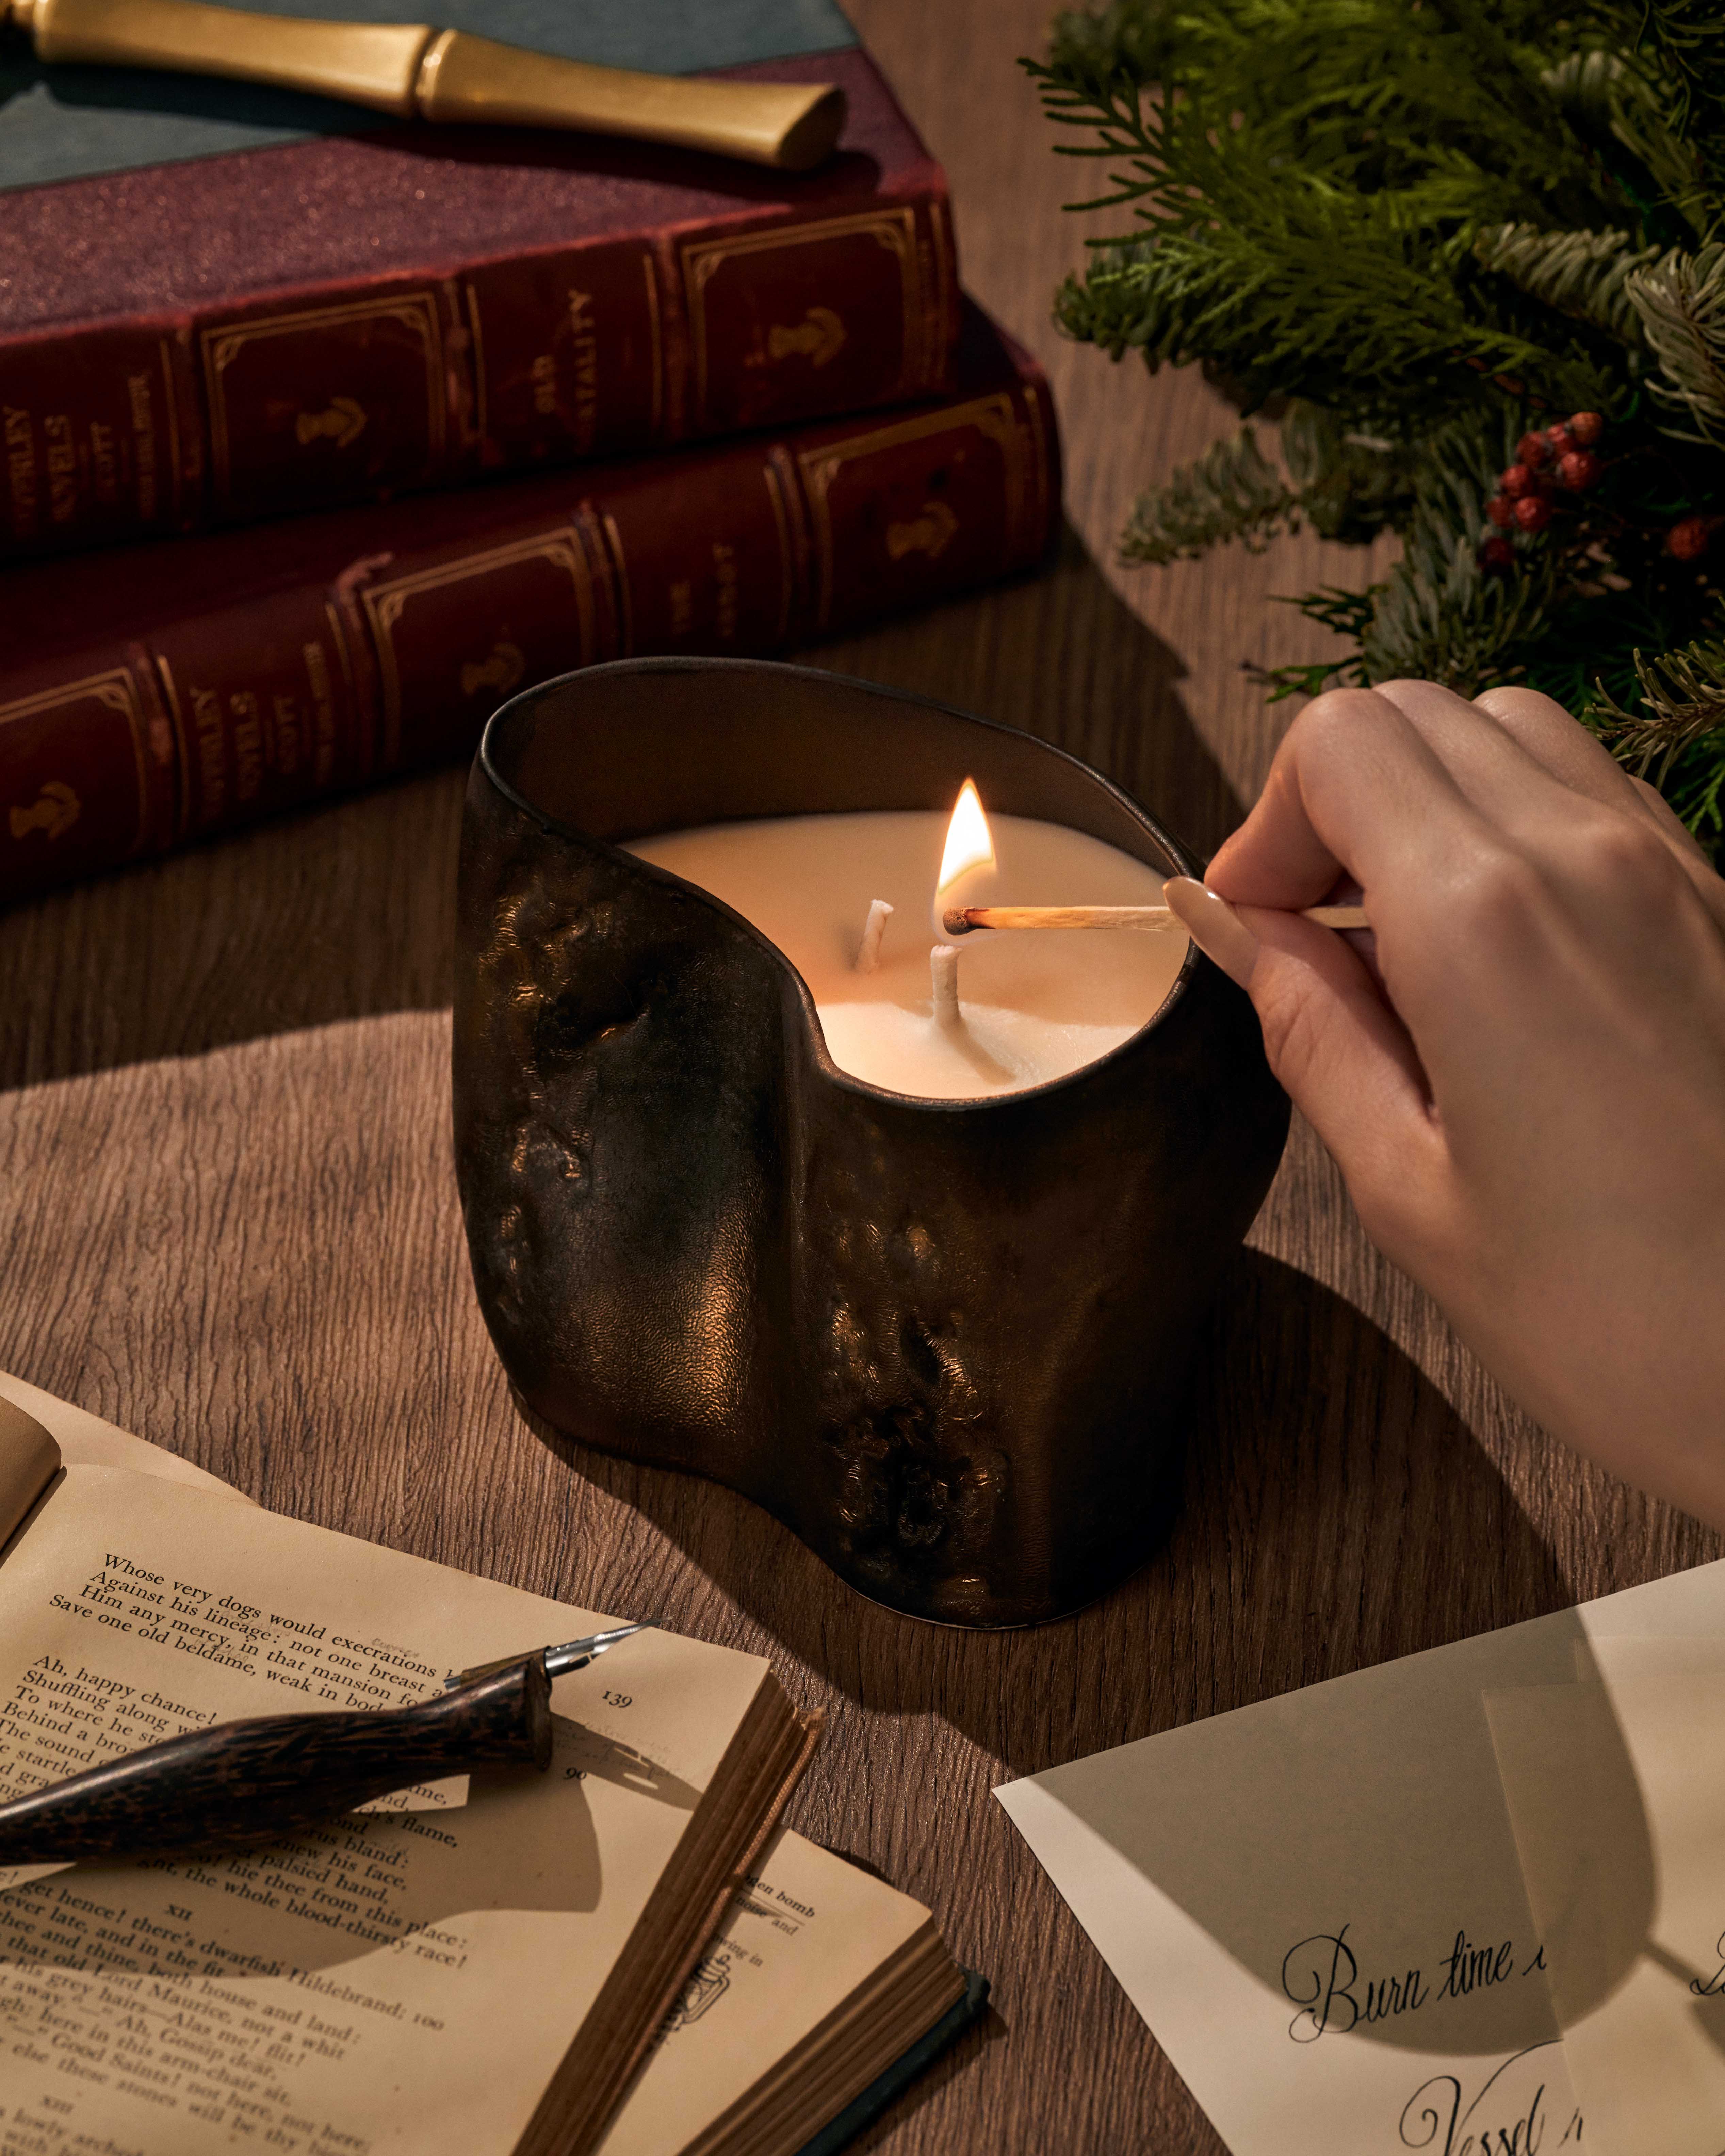 80 HOURS: Singapore Watch Club Scented Candle